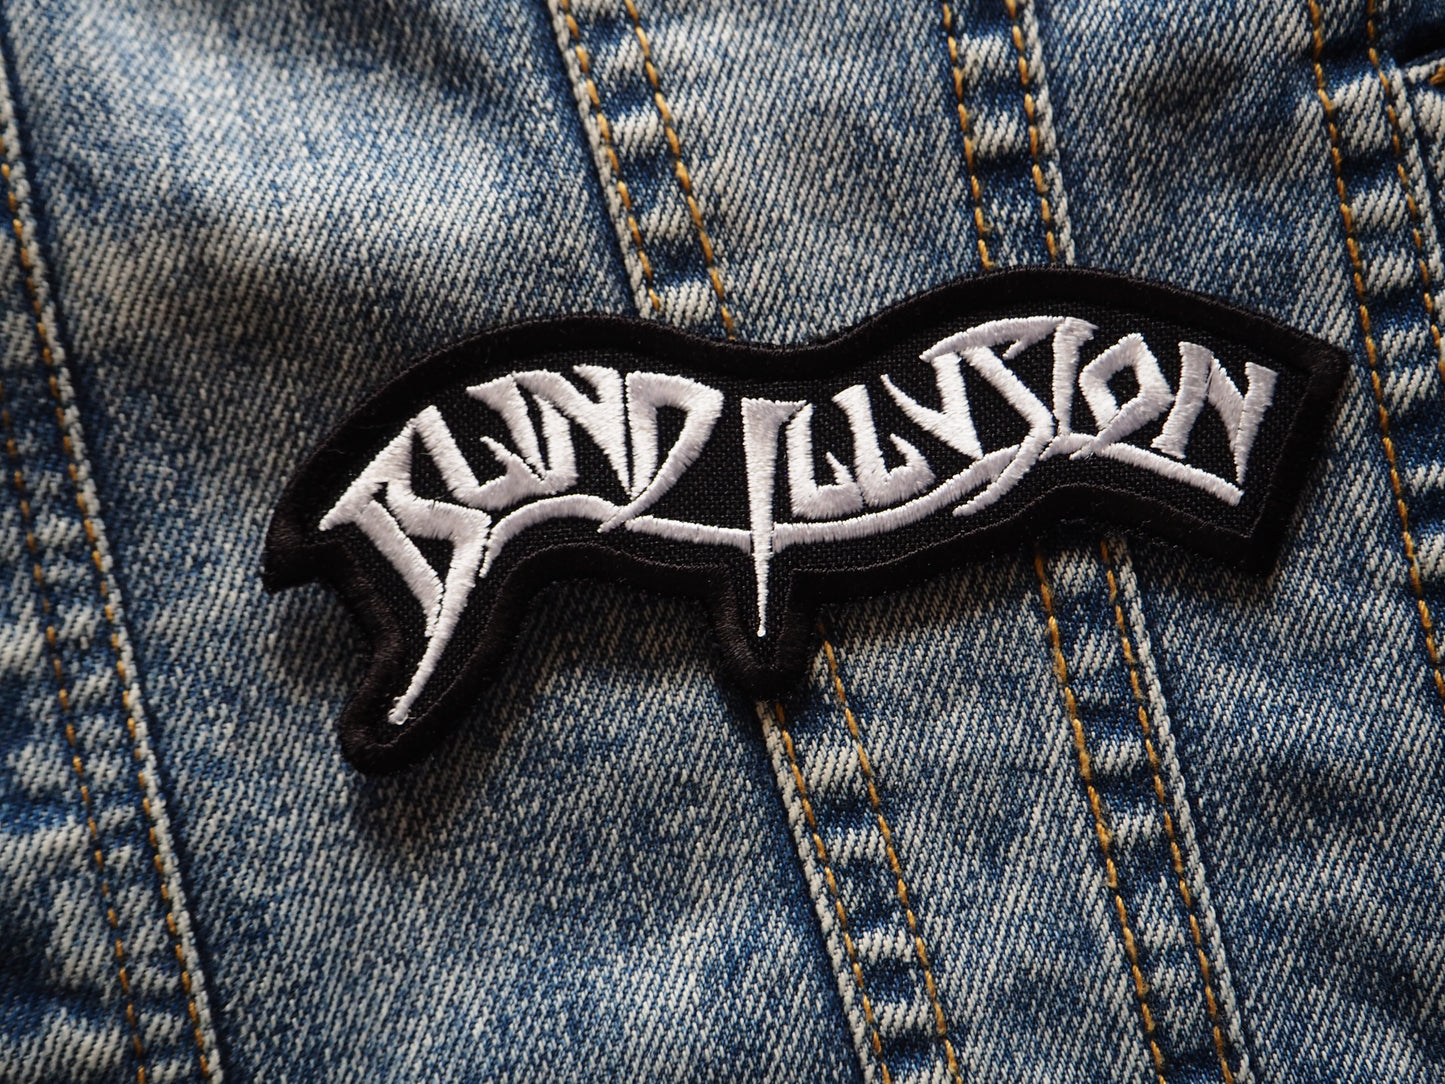 Blind Illusion Patch